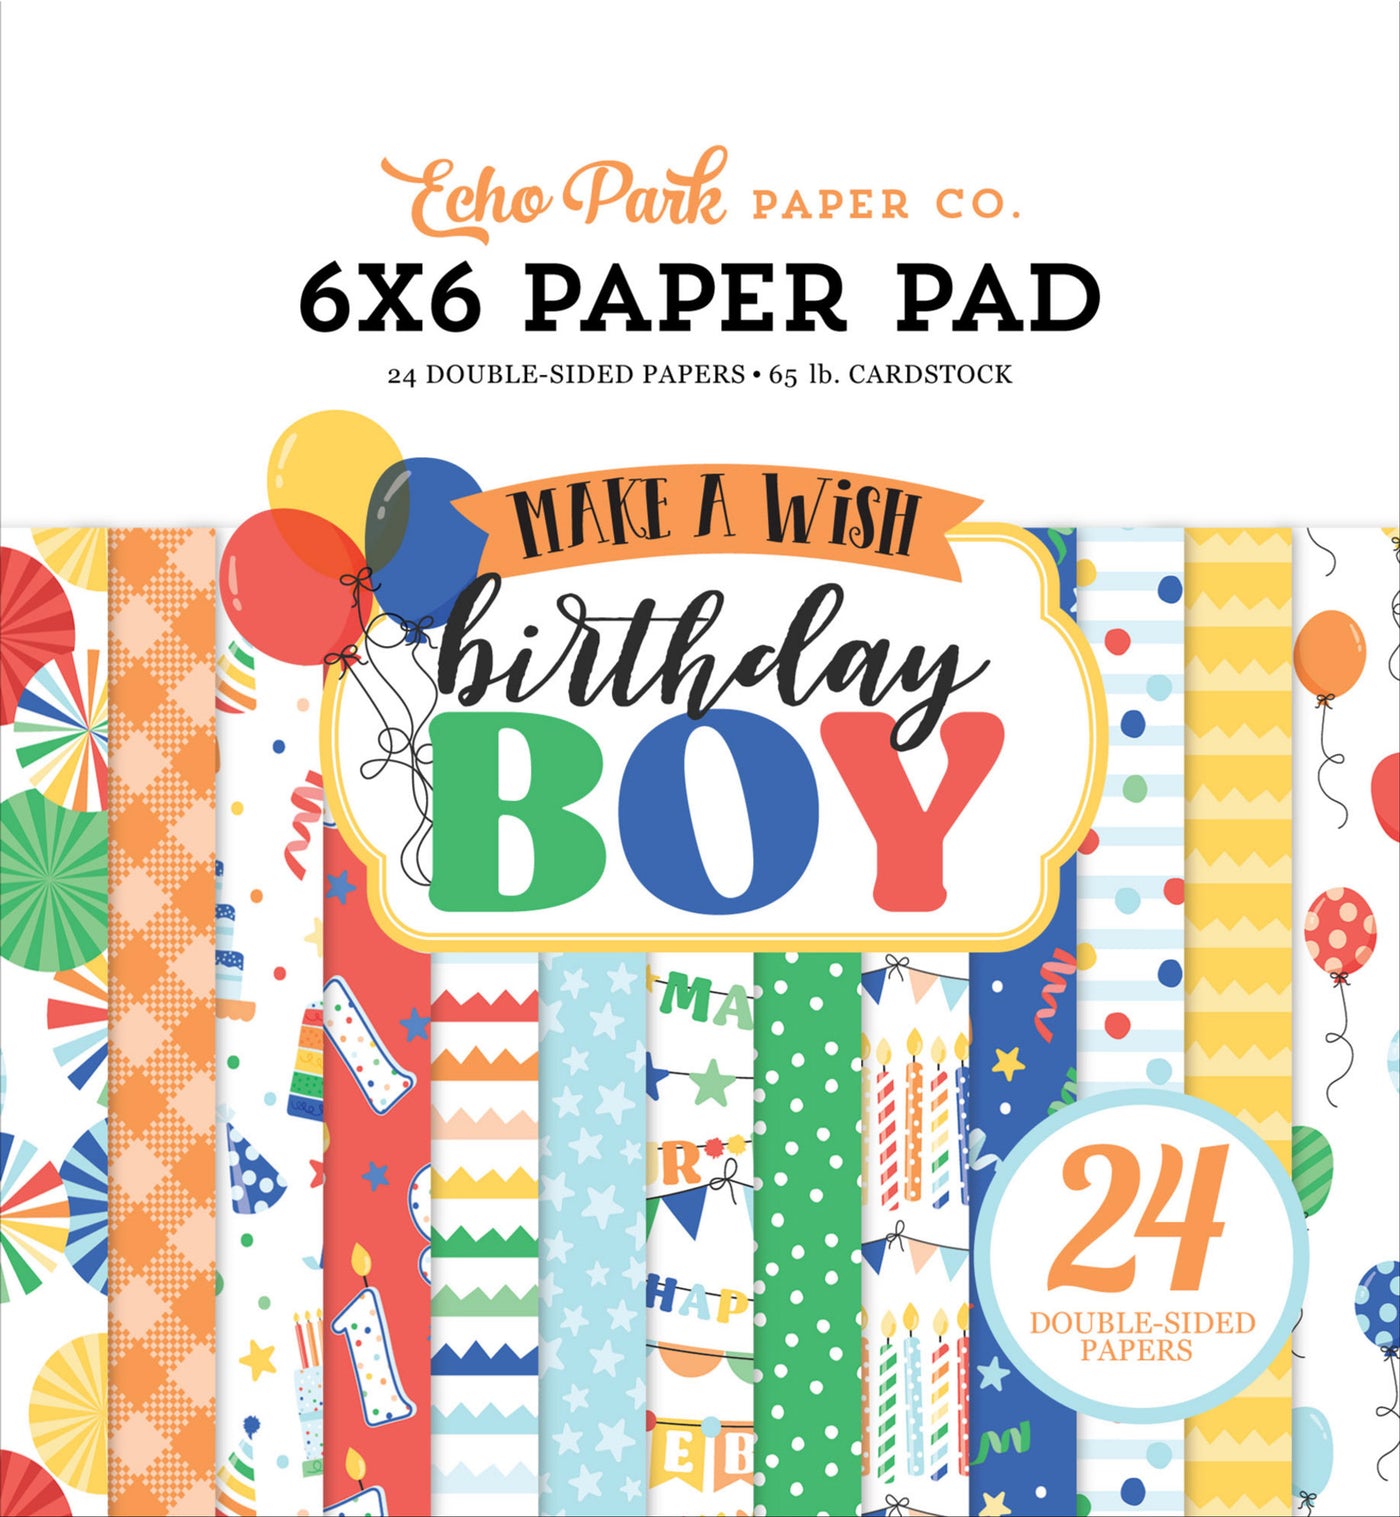 The Make-A-Wish Birthday Boy 6x6 Paper Pad by Echo Park is a delightful collection of premium quality papers to celebrate little boys' birthdays. This paper pad features charming patterns, vibrant colors, and playful illustrations that perfectly capture the joy and excitement of birthdays.